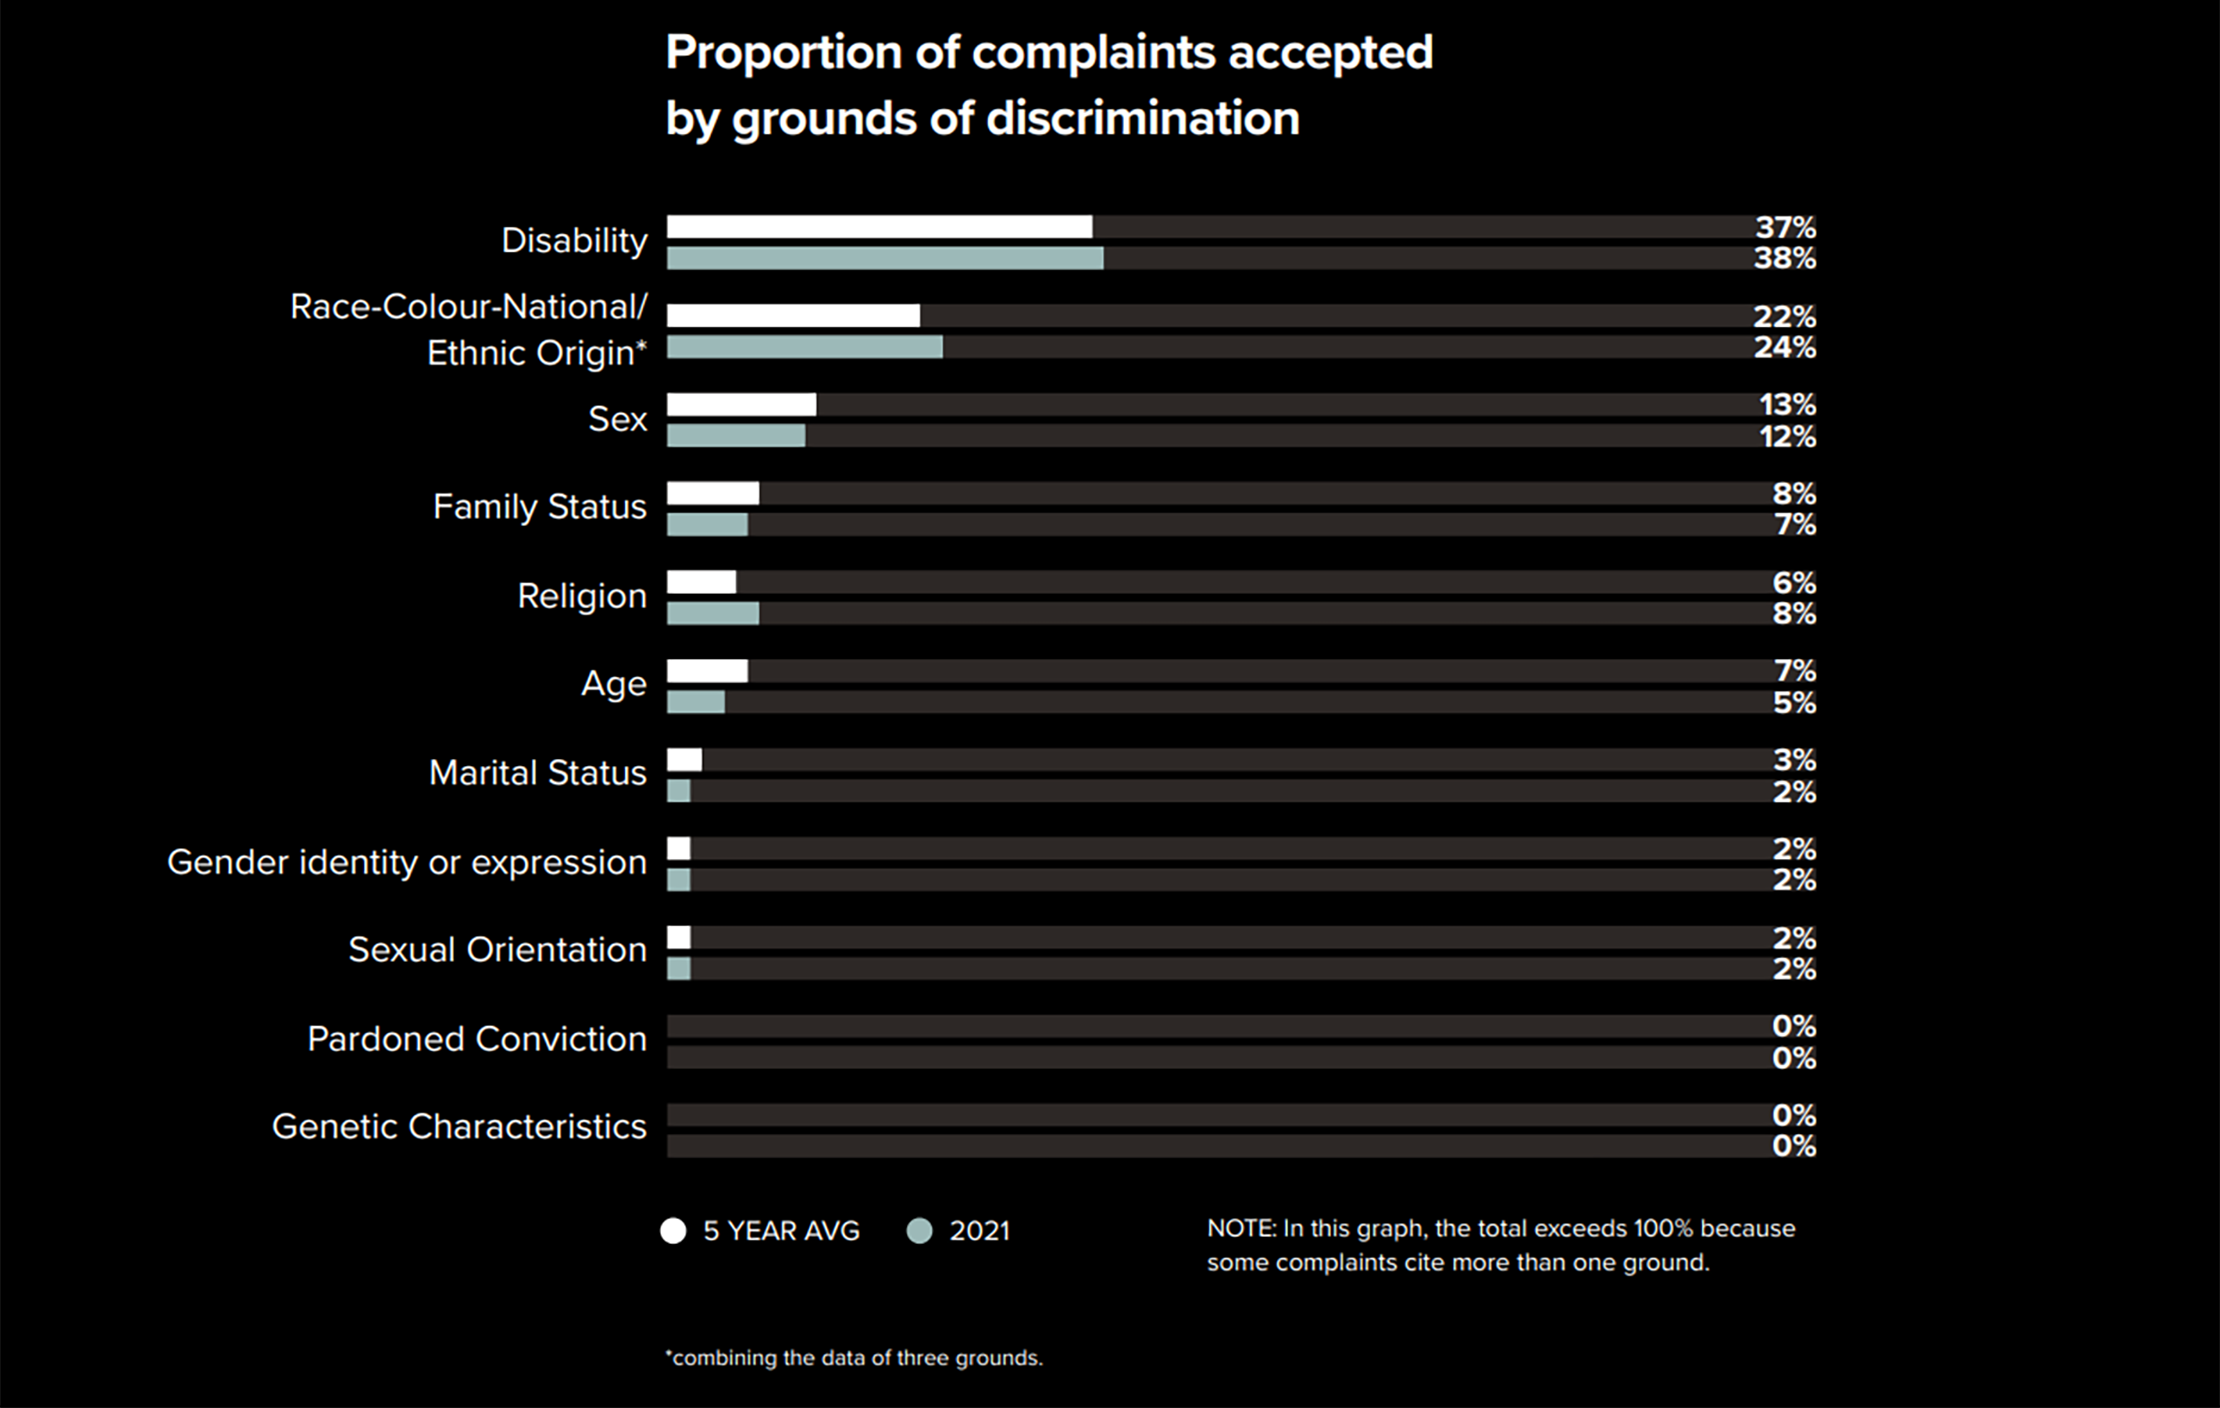 Proportion of complaints accepted - text version presented in table in the legend